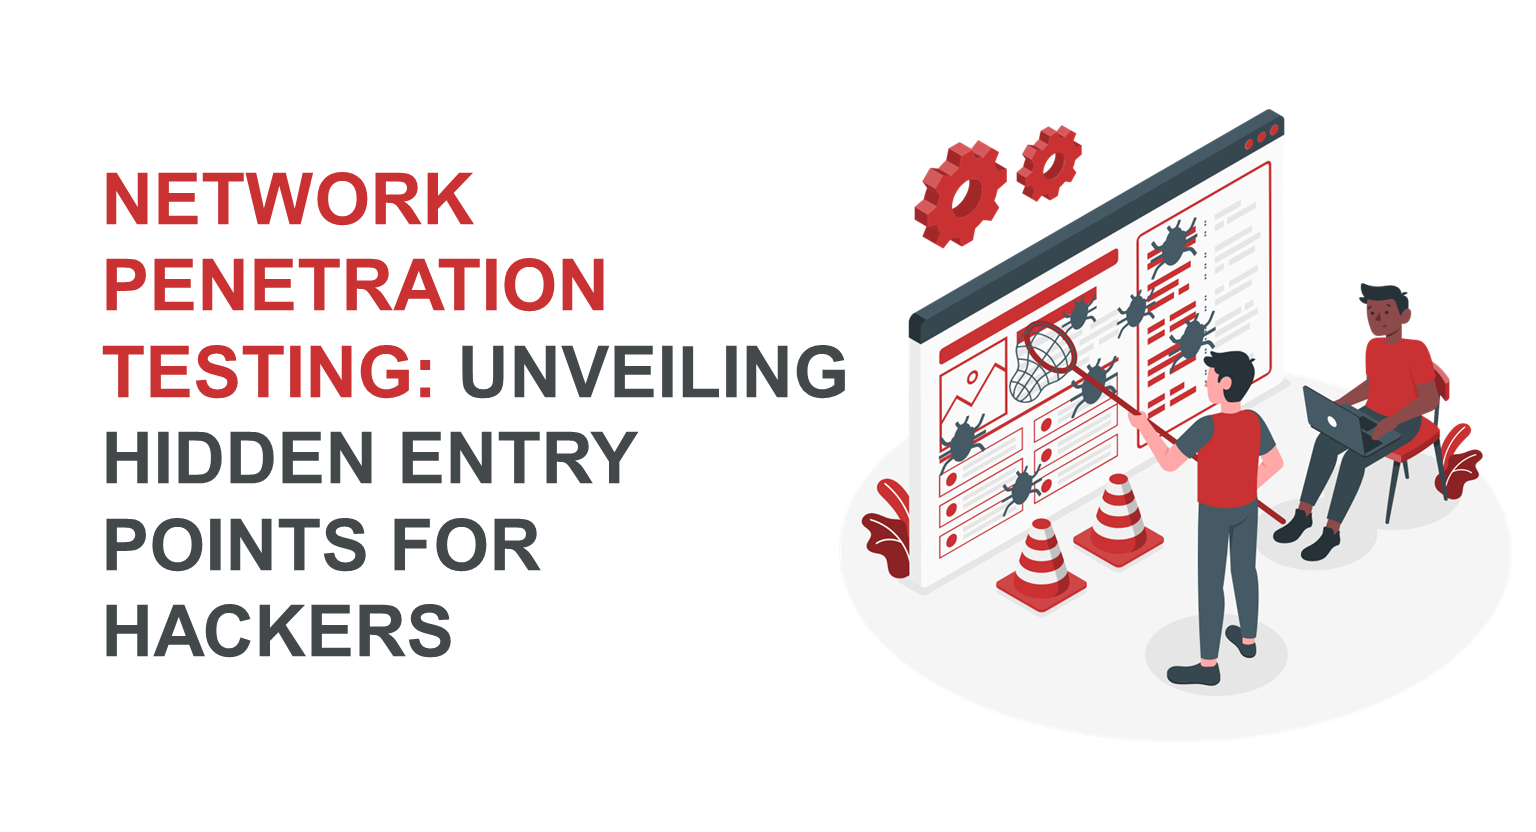 Network Penetration Testing: Unveiling Hidden Entry Points for Hackers